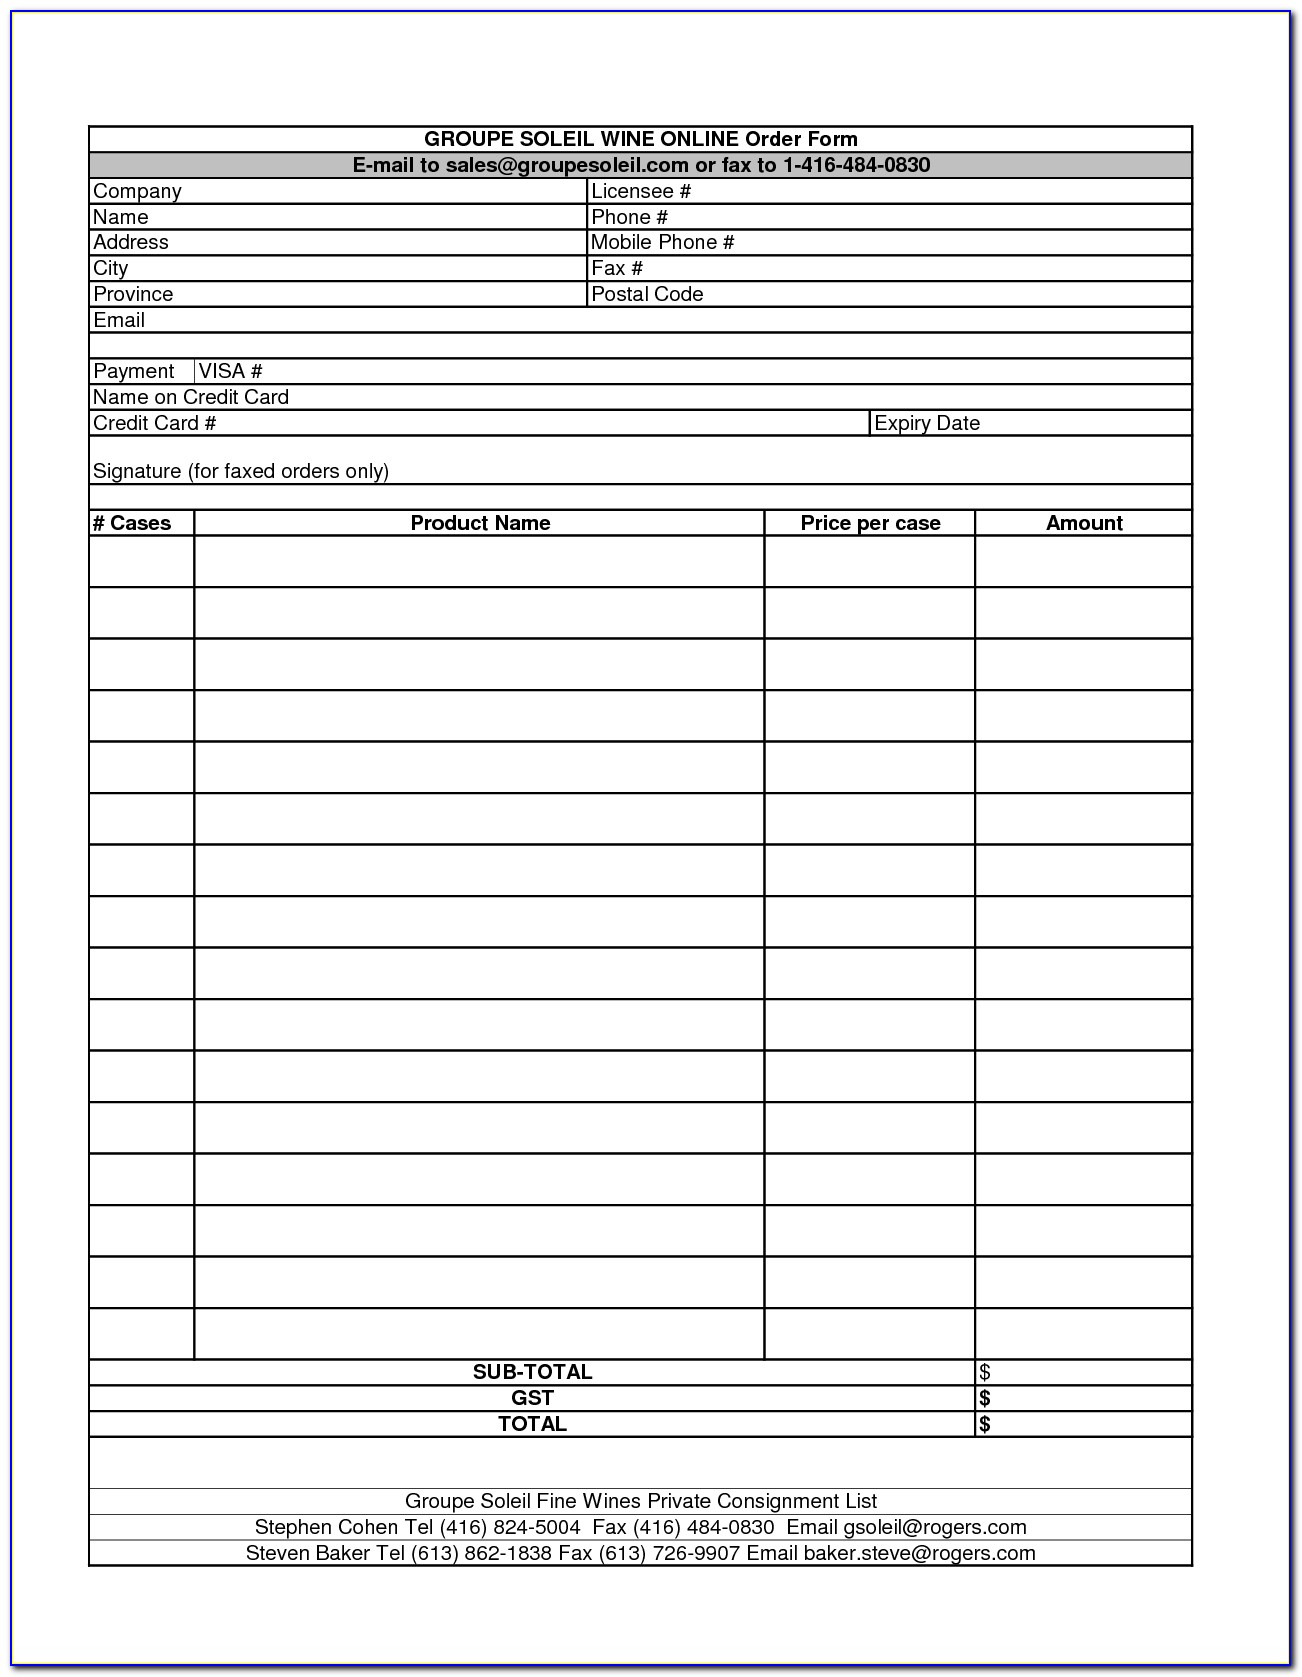 Consignment Sales Invoice Template